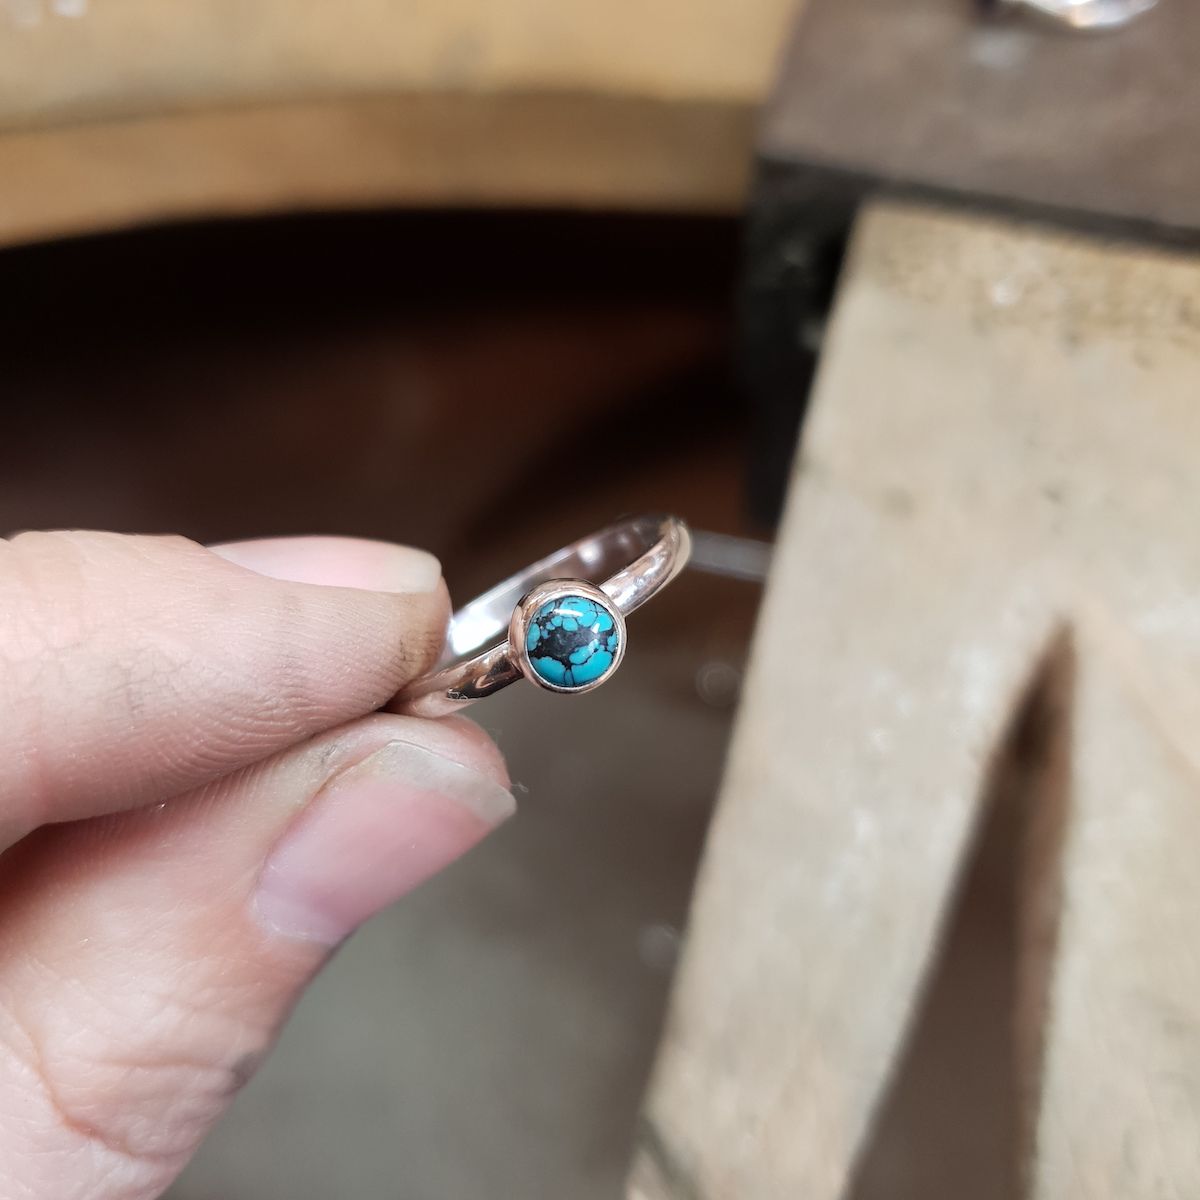 DIY: Best Way to Glue a Cabochon in a Bezel Setting